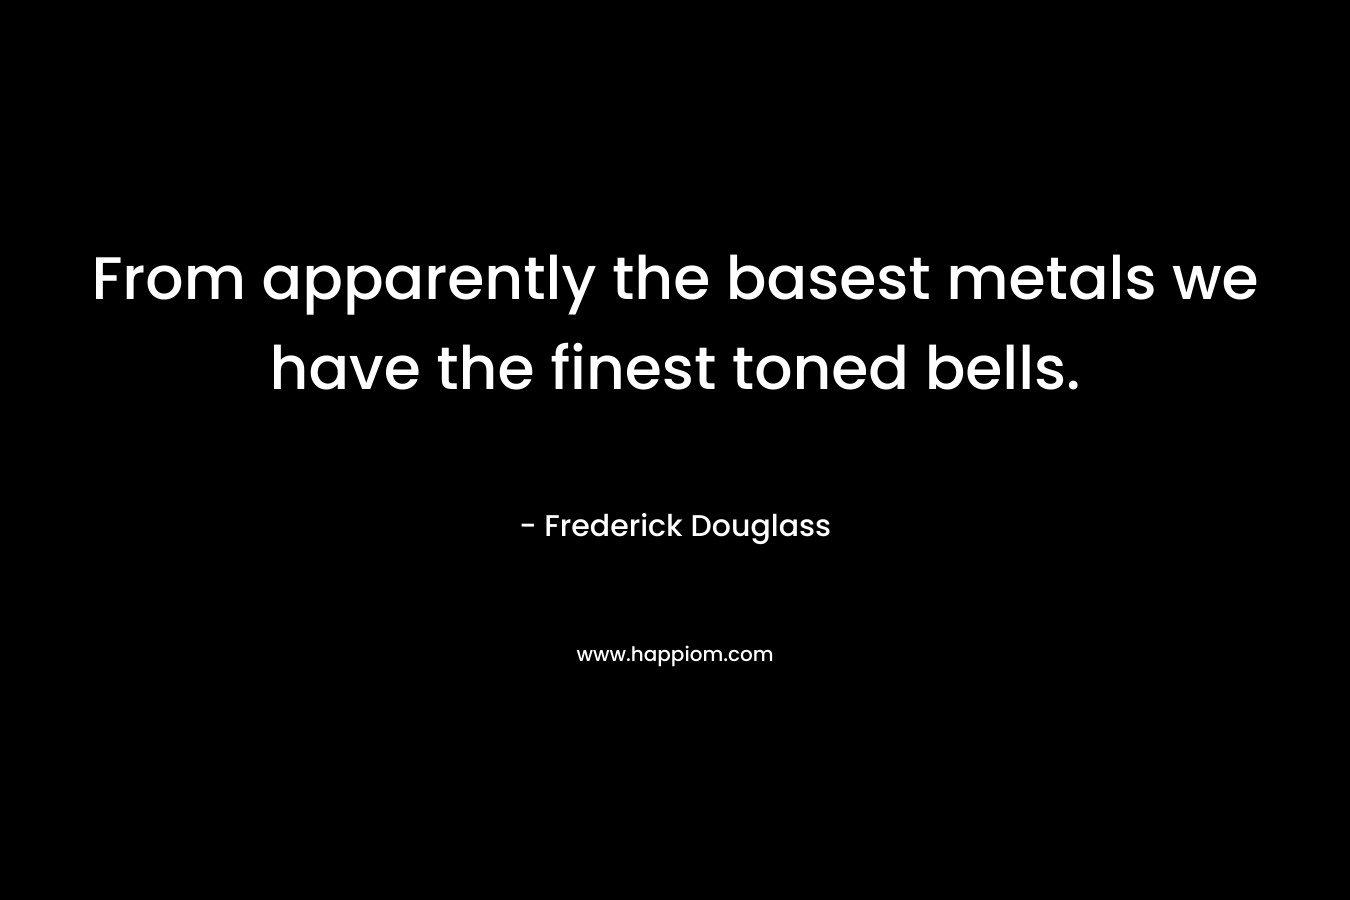 From apparently the basest metals we have the finest toned bells. – Frederick Douglass